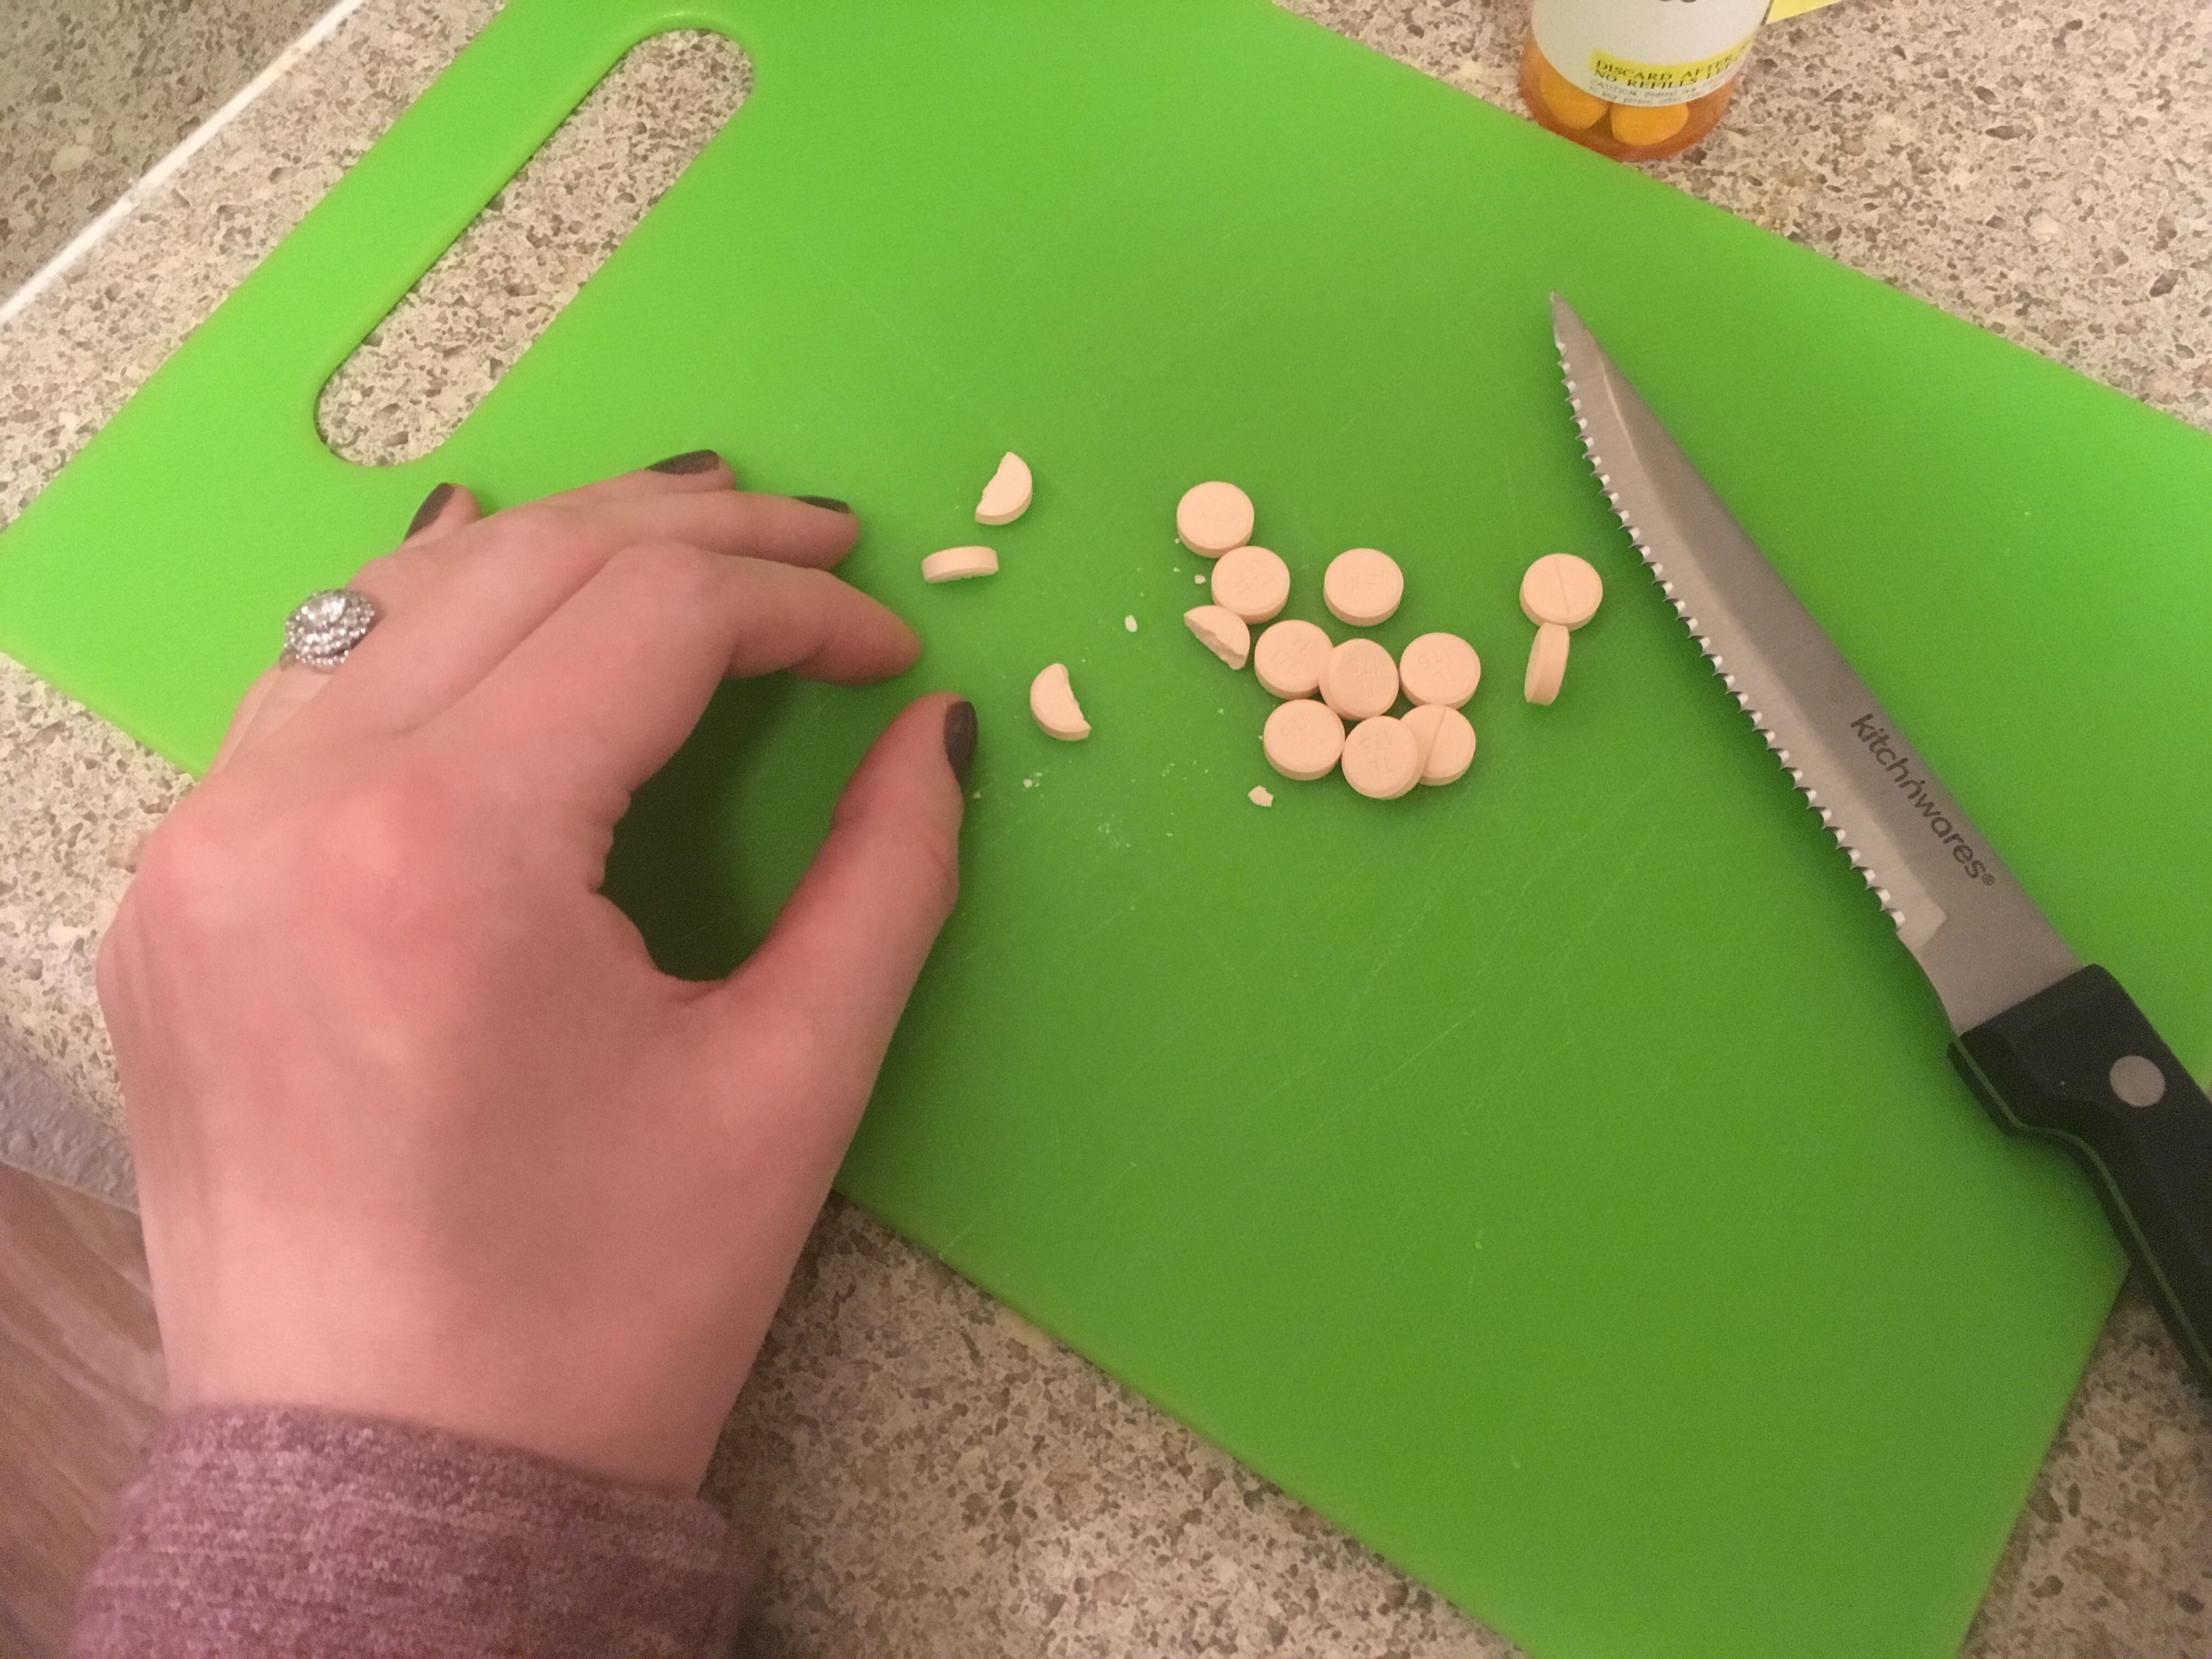 Jenna cutting pink prednisone tablets on green cutting board to get the right dose